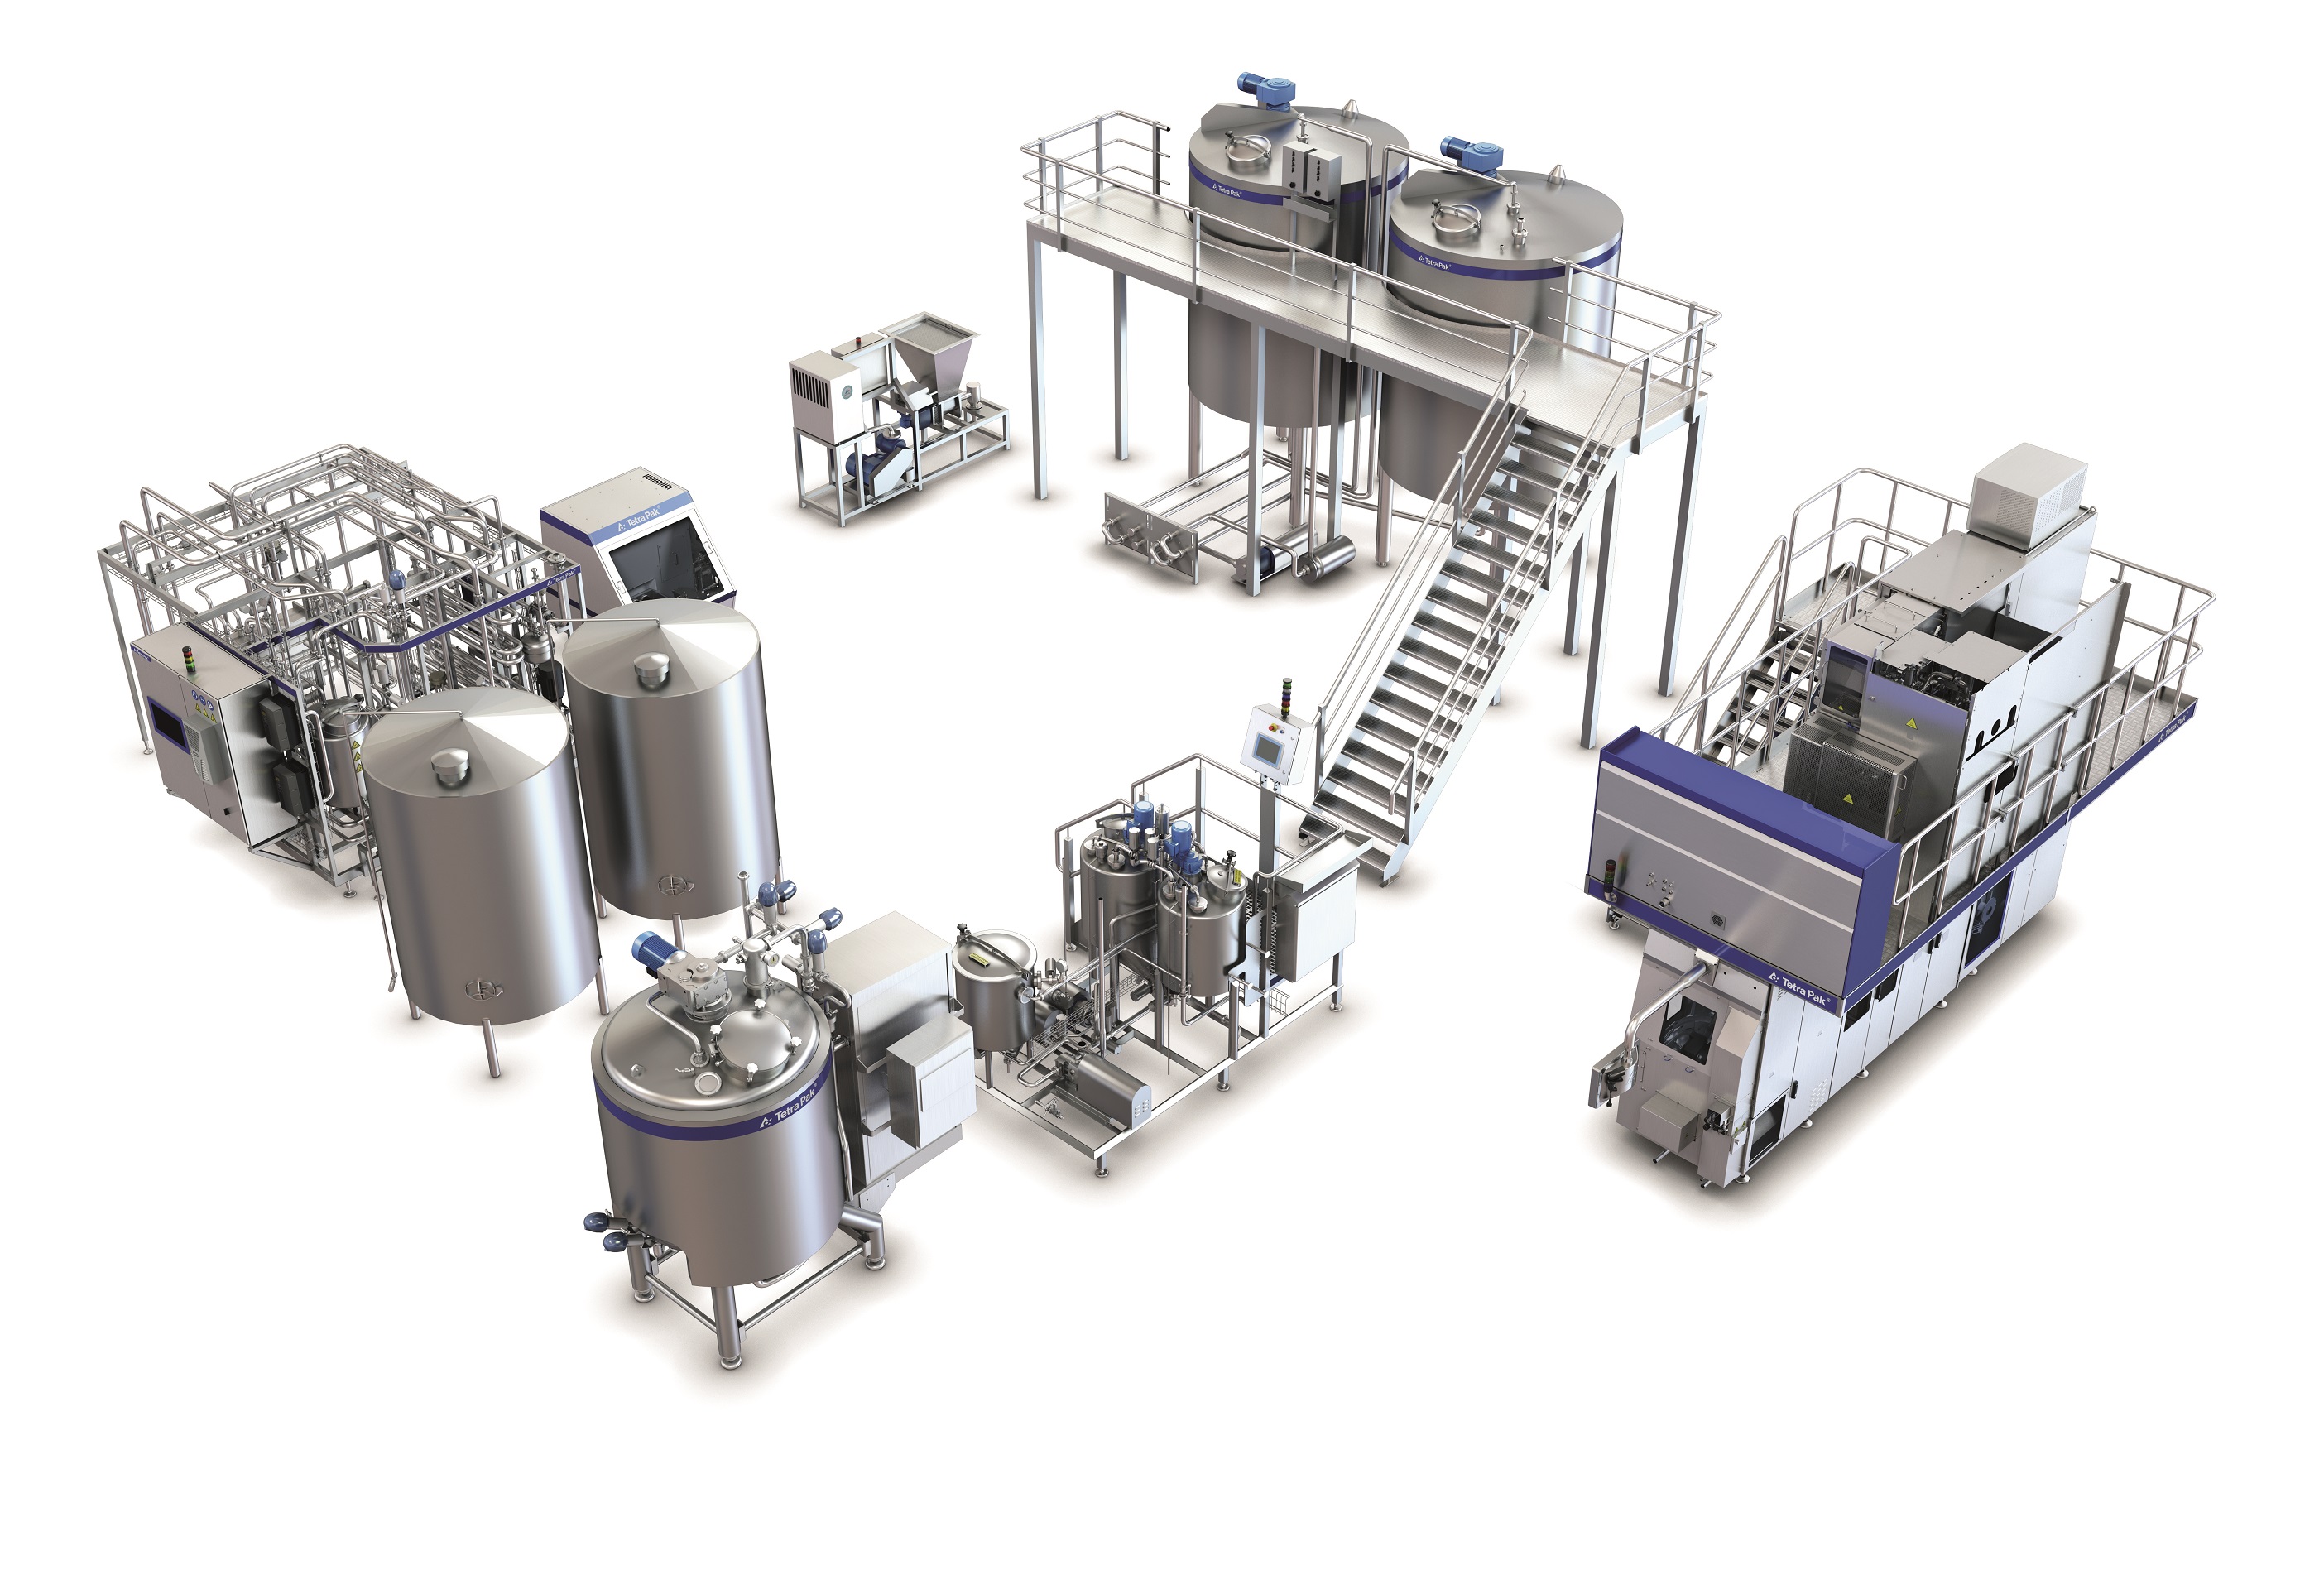 The complete processing line will use proven technologies such as ultrafiltration and high shear mixing.